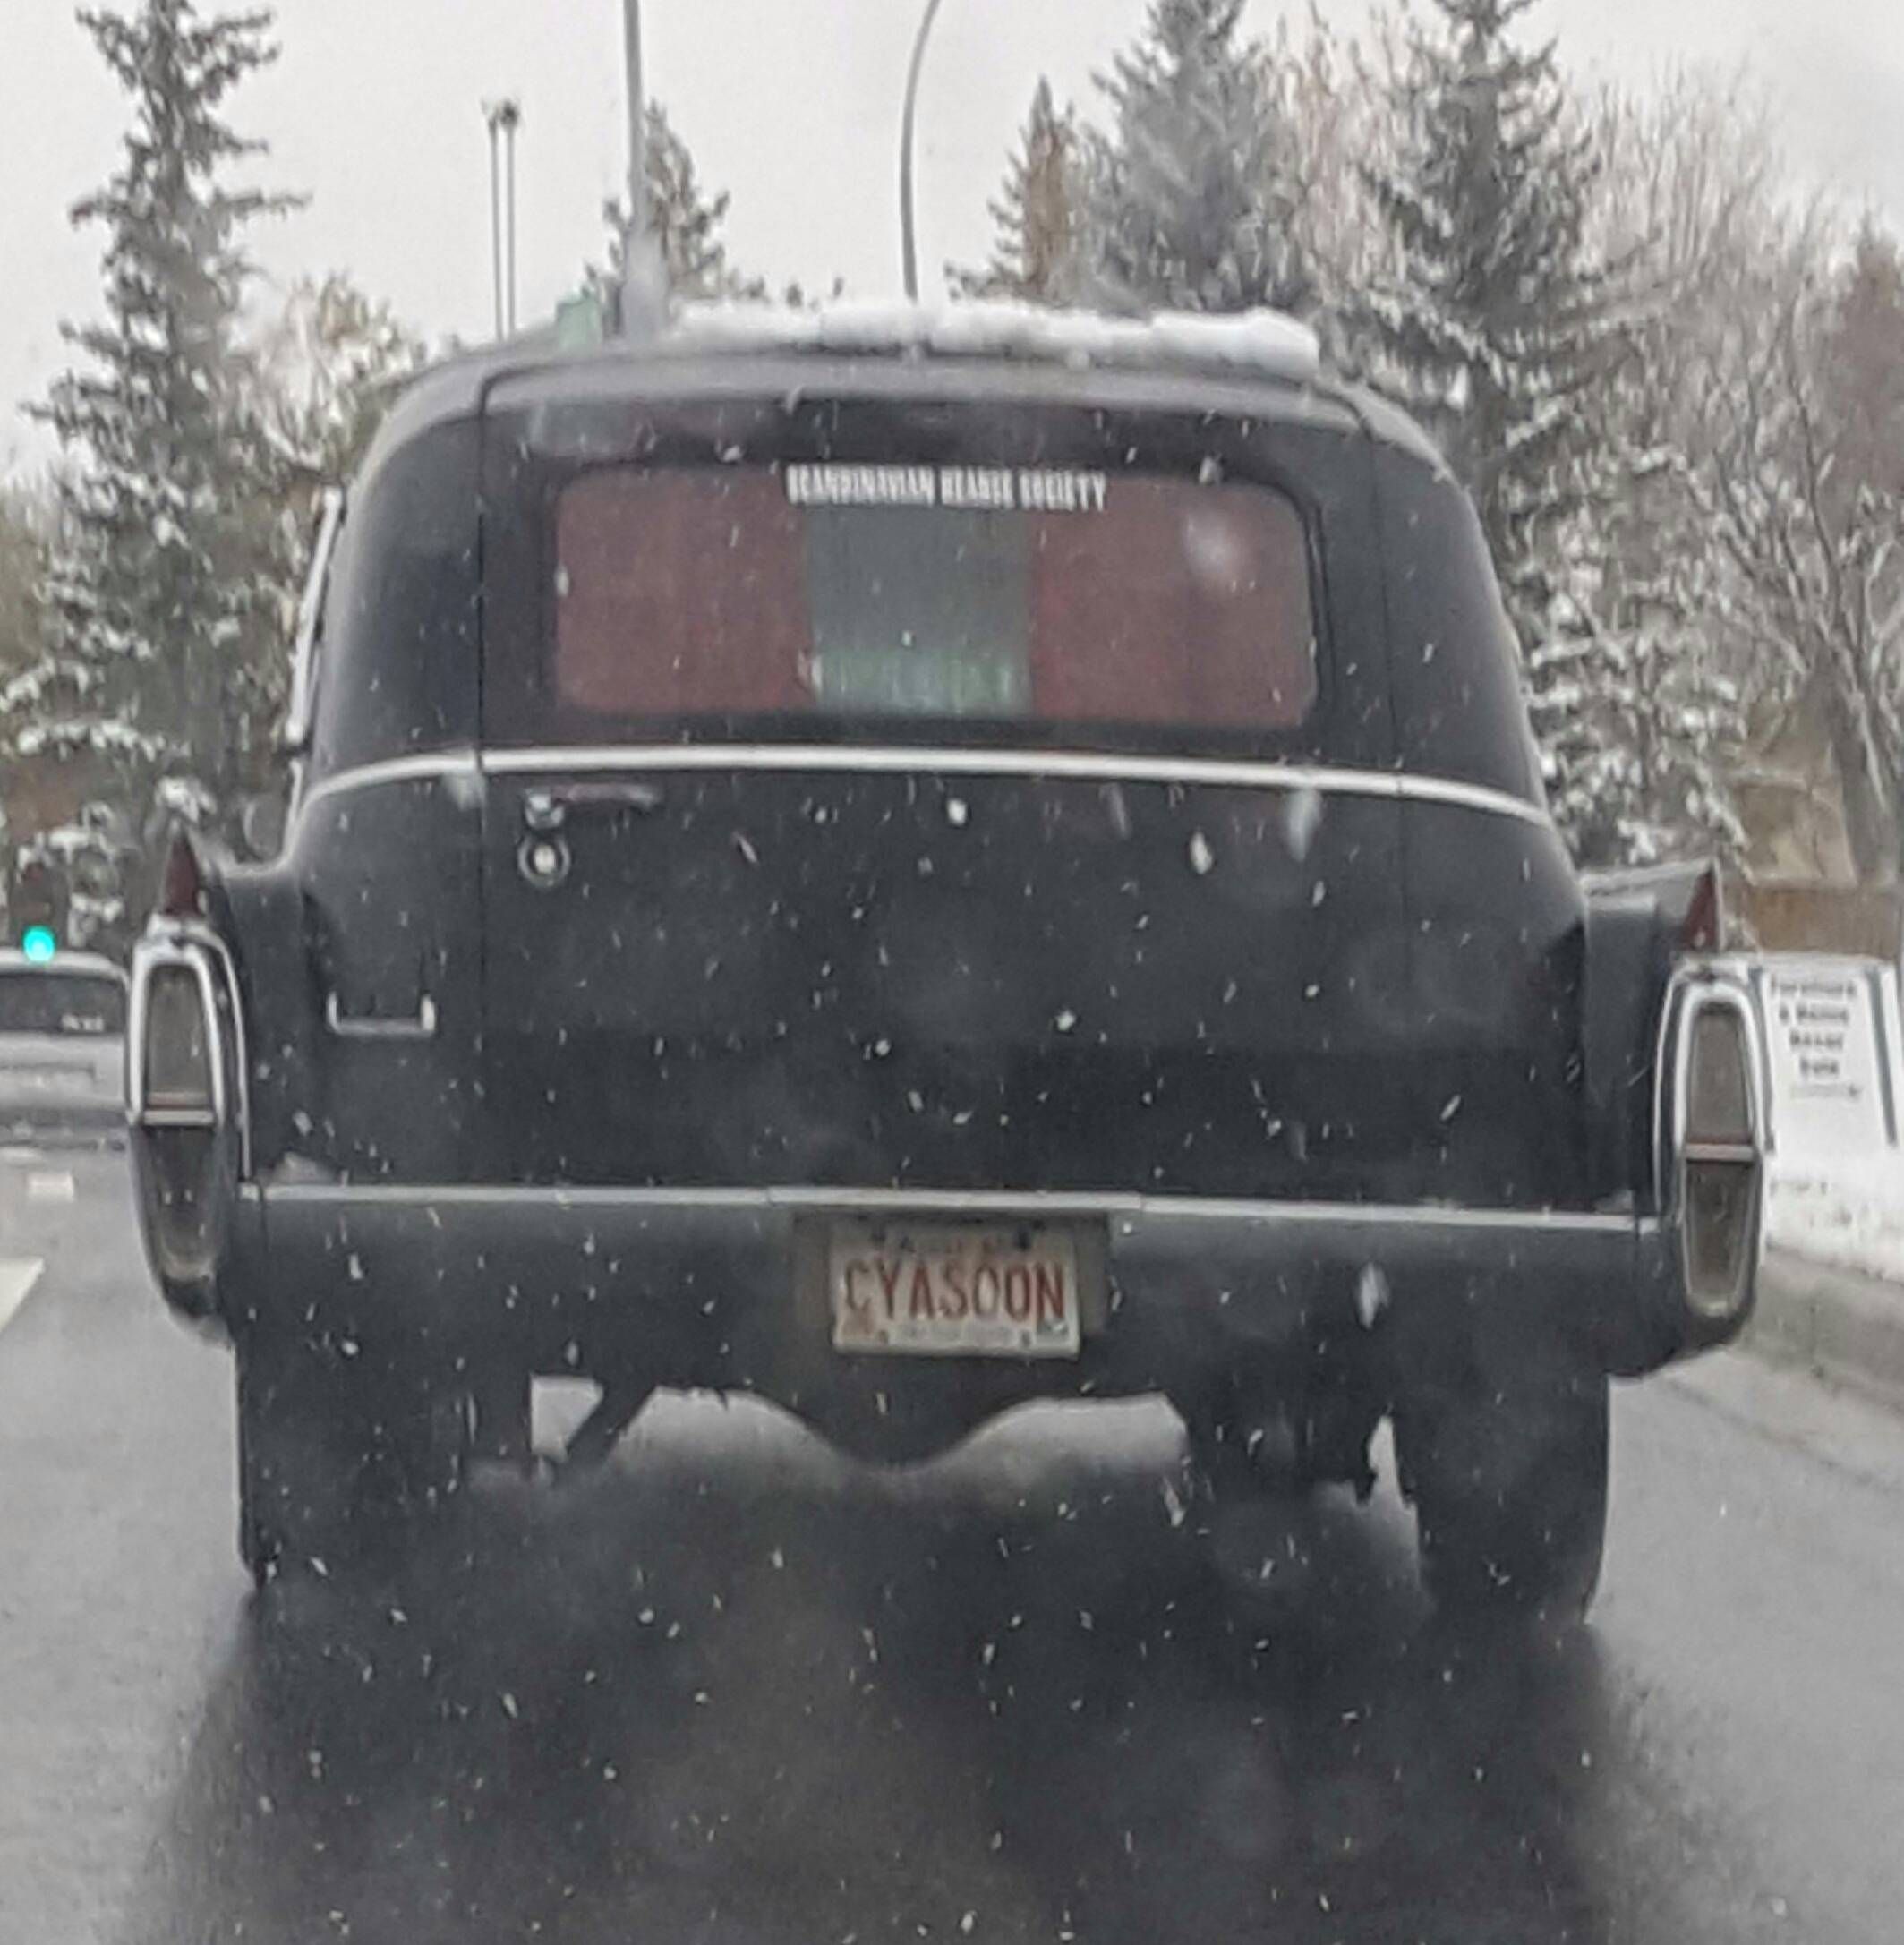 I was driving behind a hearse today with a chillingly appropriate license plate.